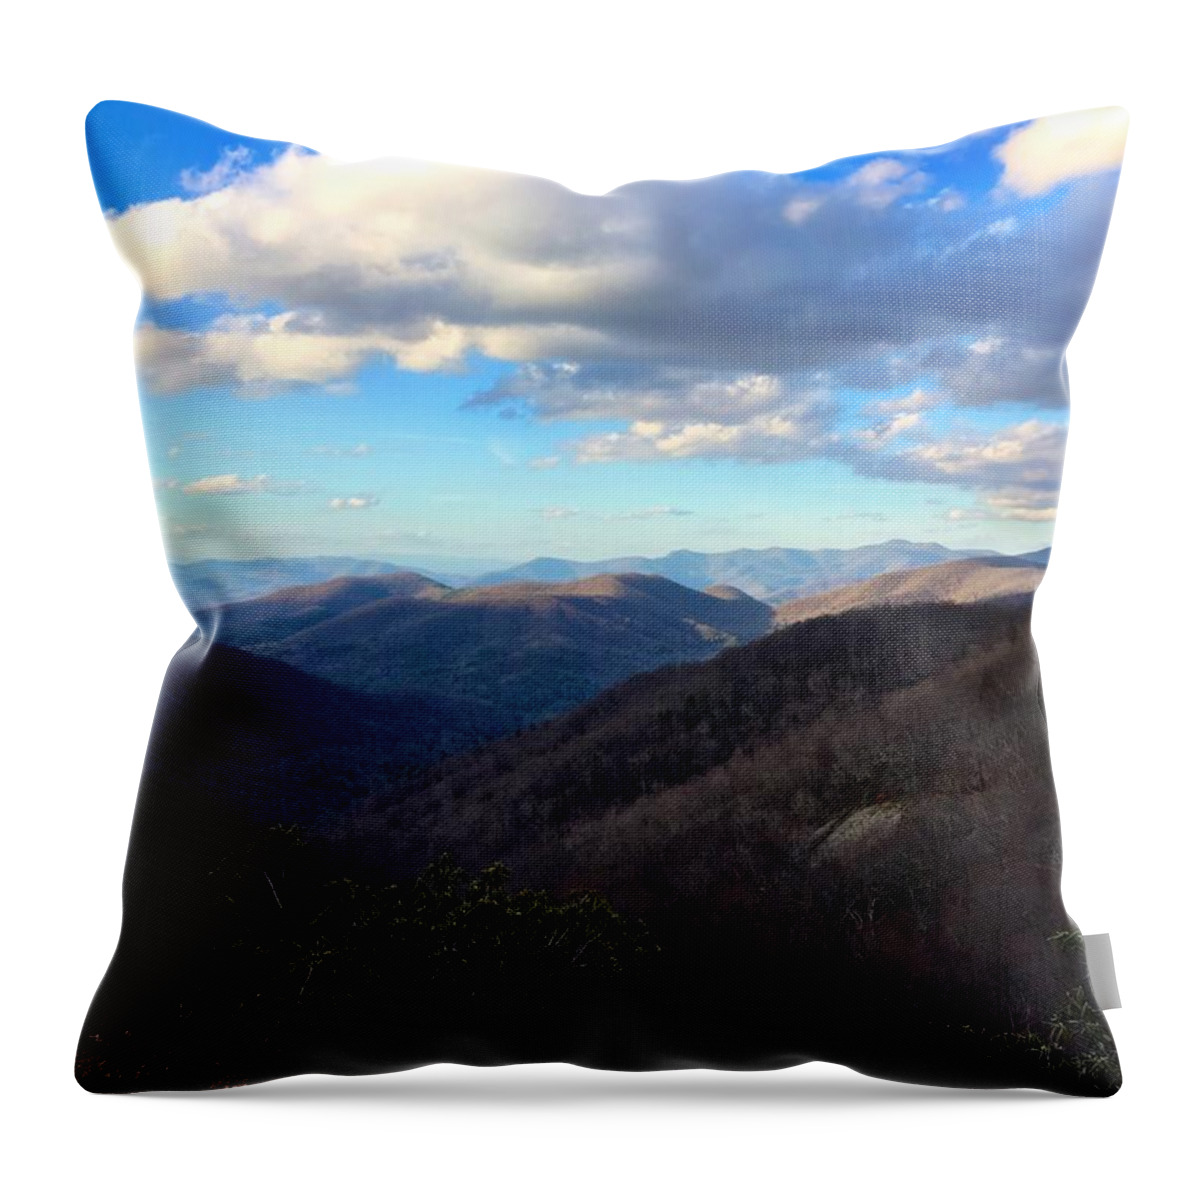 Landscape Throw Pillow featuring the photograph Vista by Richie Parks